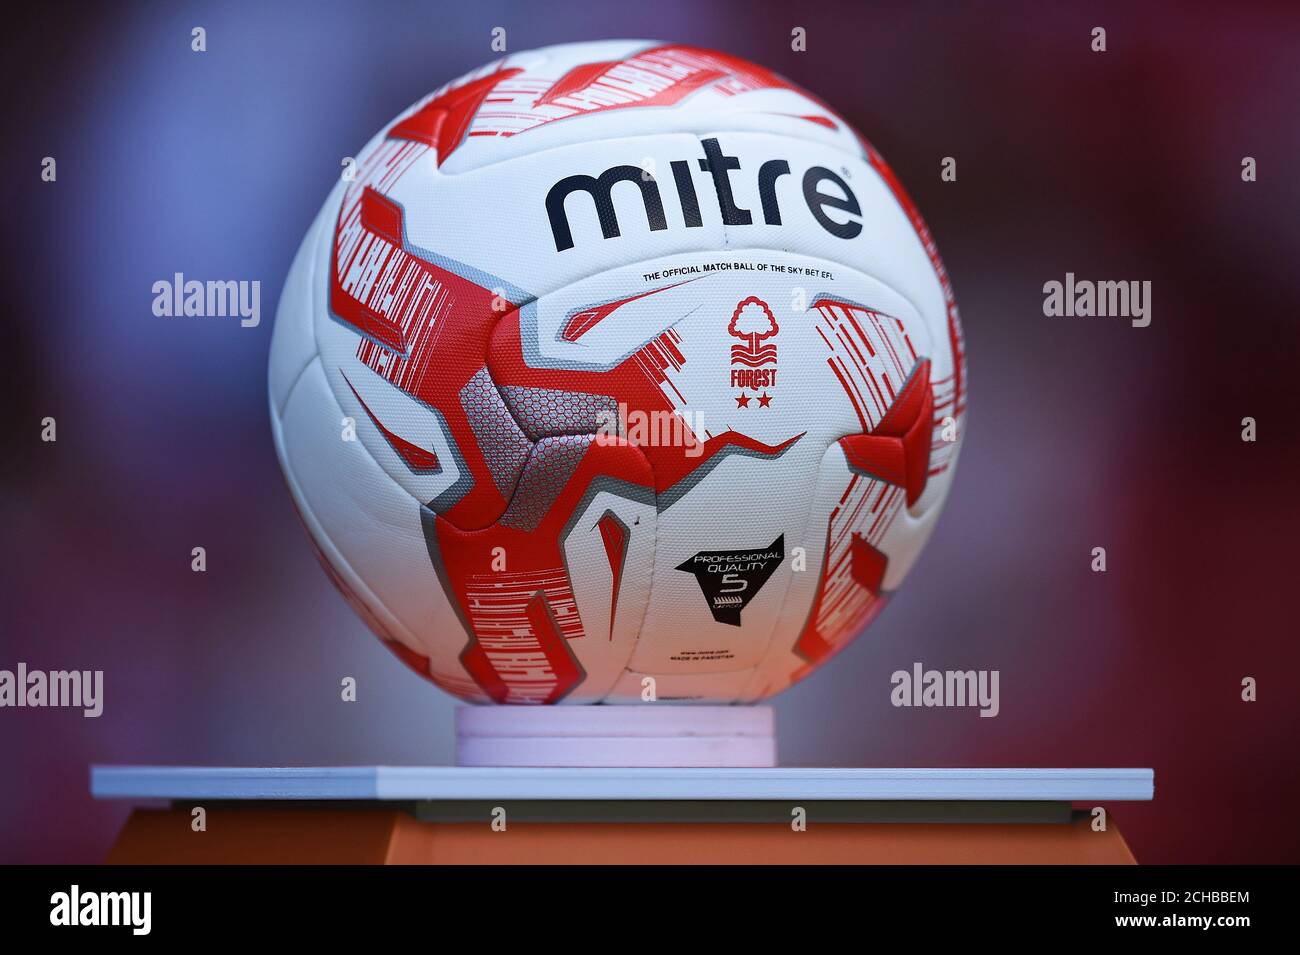 A view on an official Mitre Nottingham Forest match ball. Stock Photo